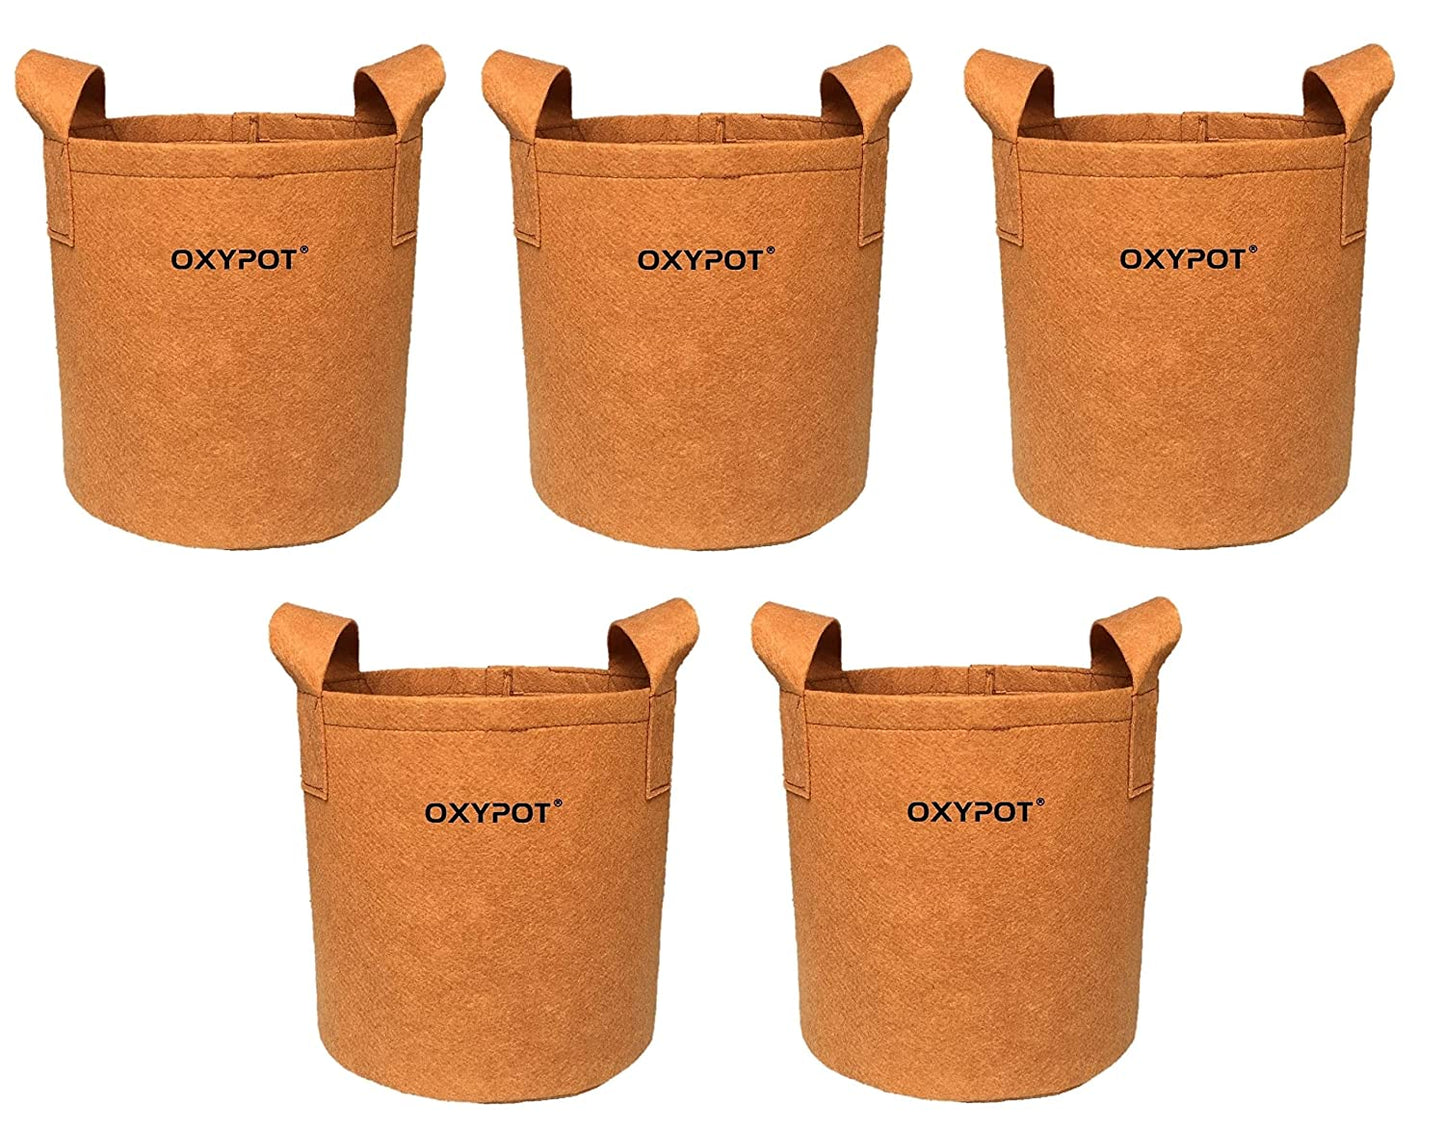 Oxypot Air Pruning Fabric Grow Bags (10 X 10 Inches)- Pack of 5